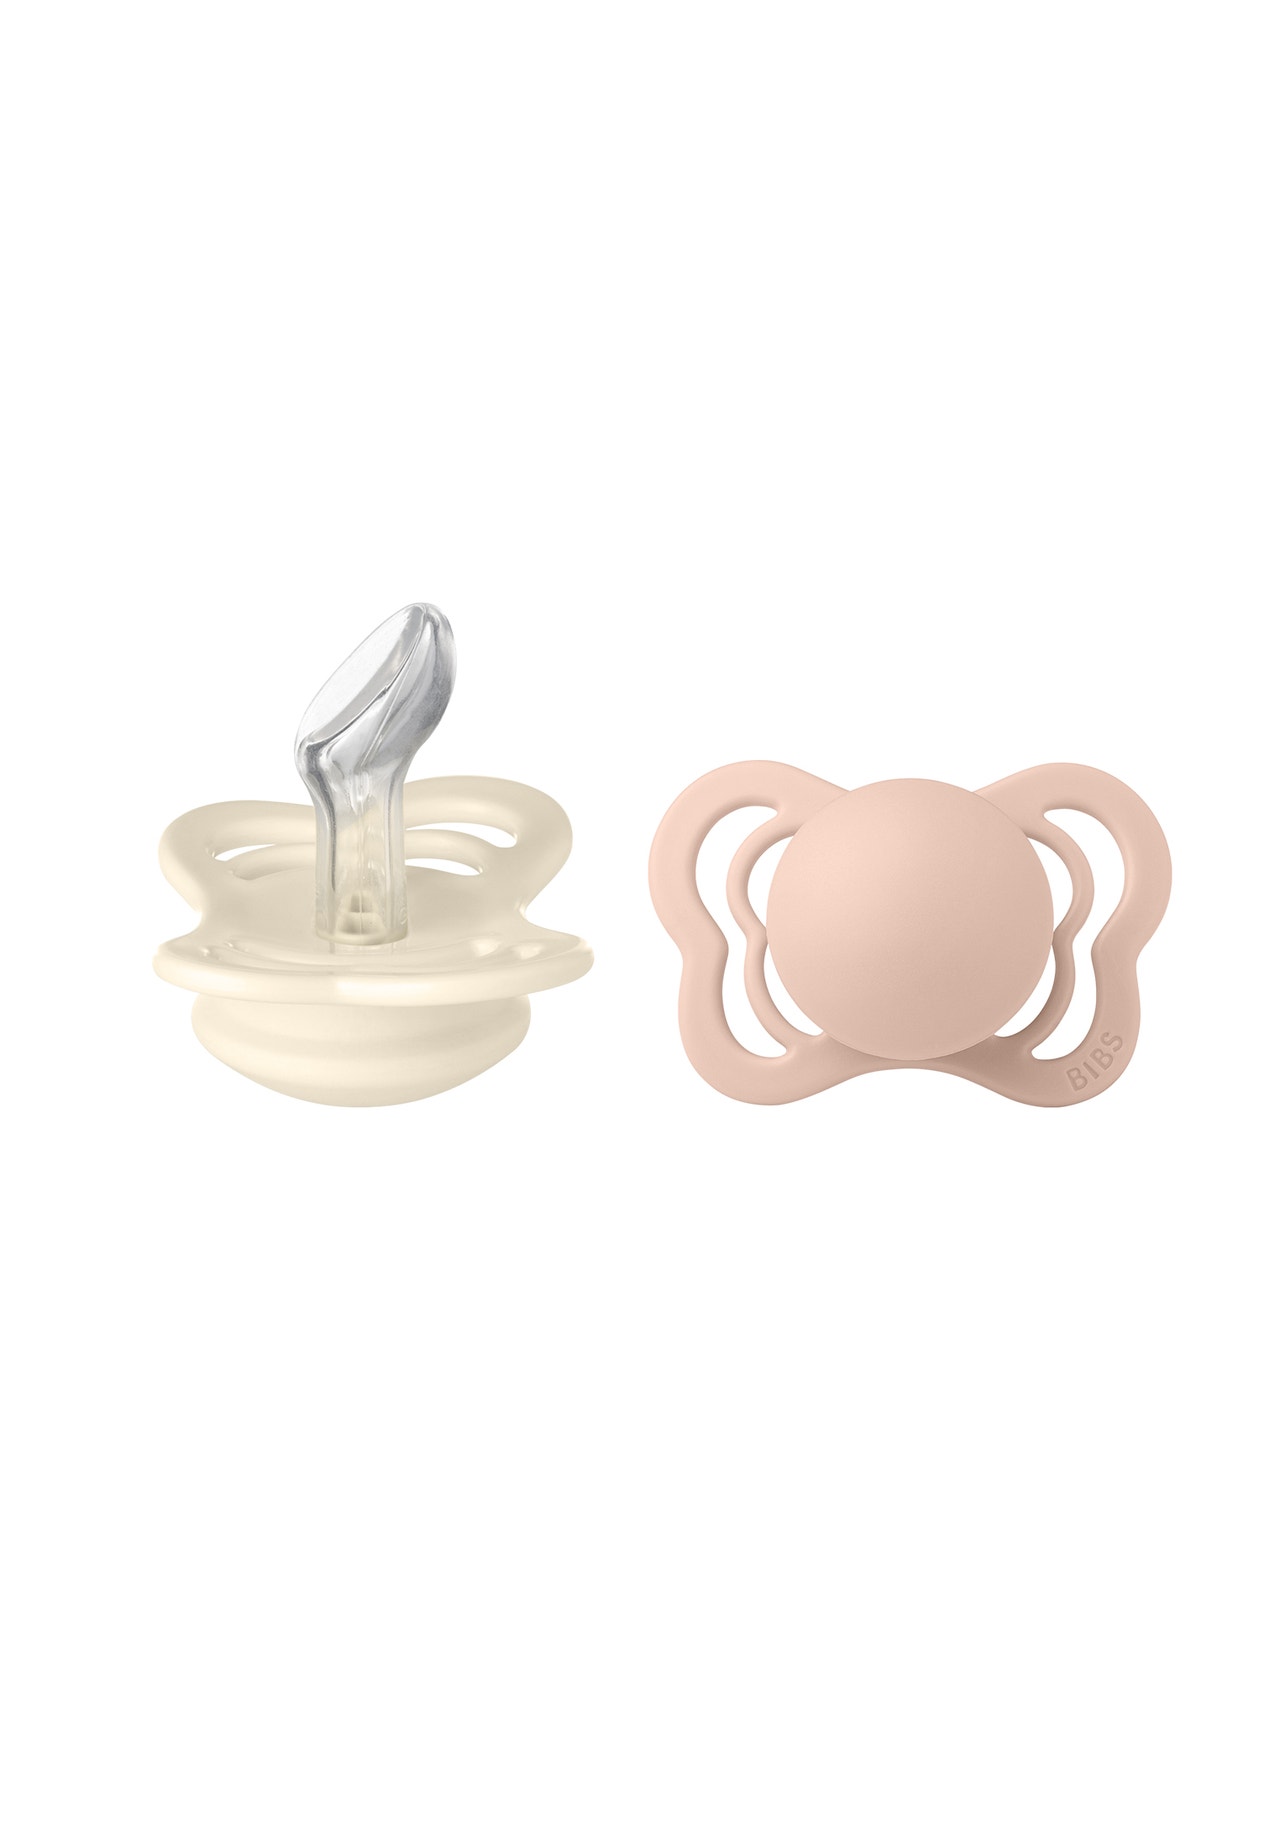 MAMA.LICIOUS BIBS Couture Silicone, 2-pack -Ivory/Blush - 77777769